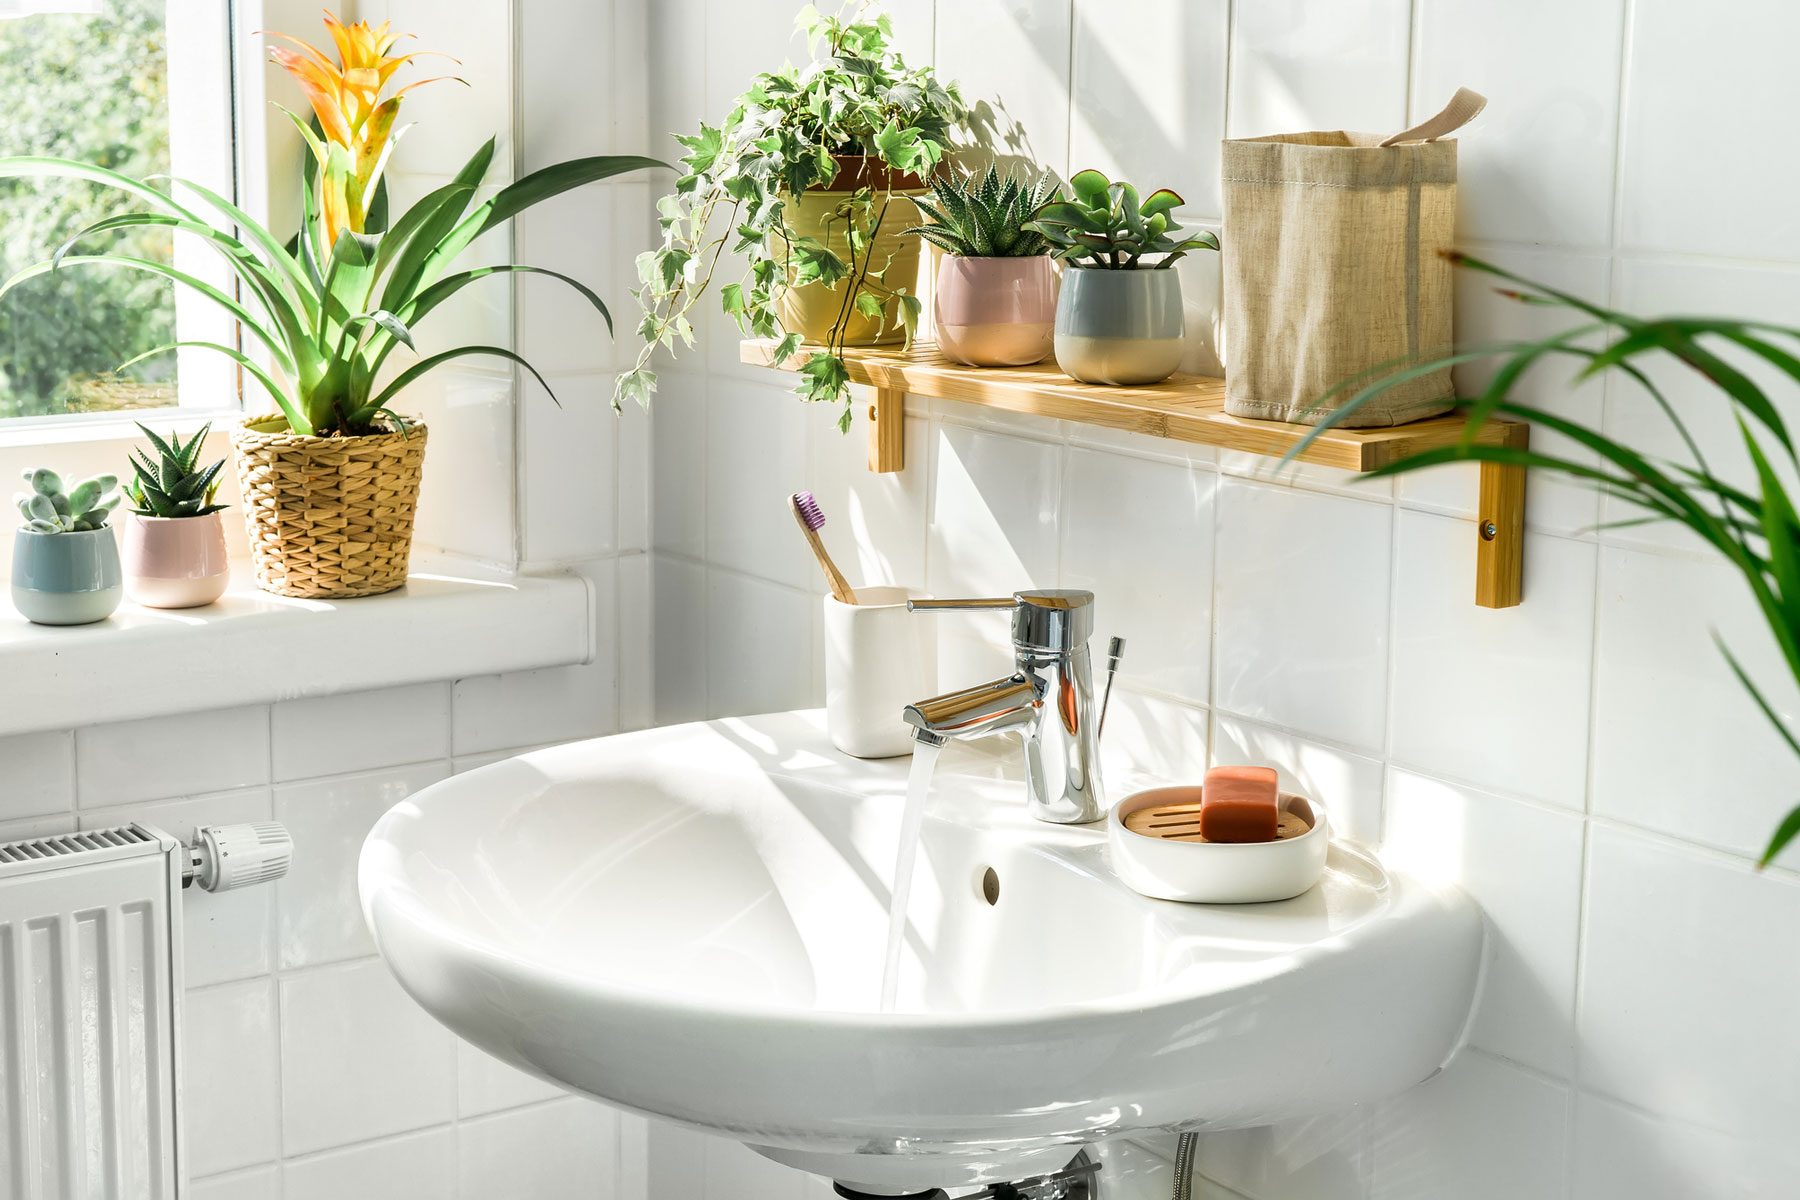 How To Make Your Bathroom More Sustainable